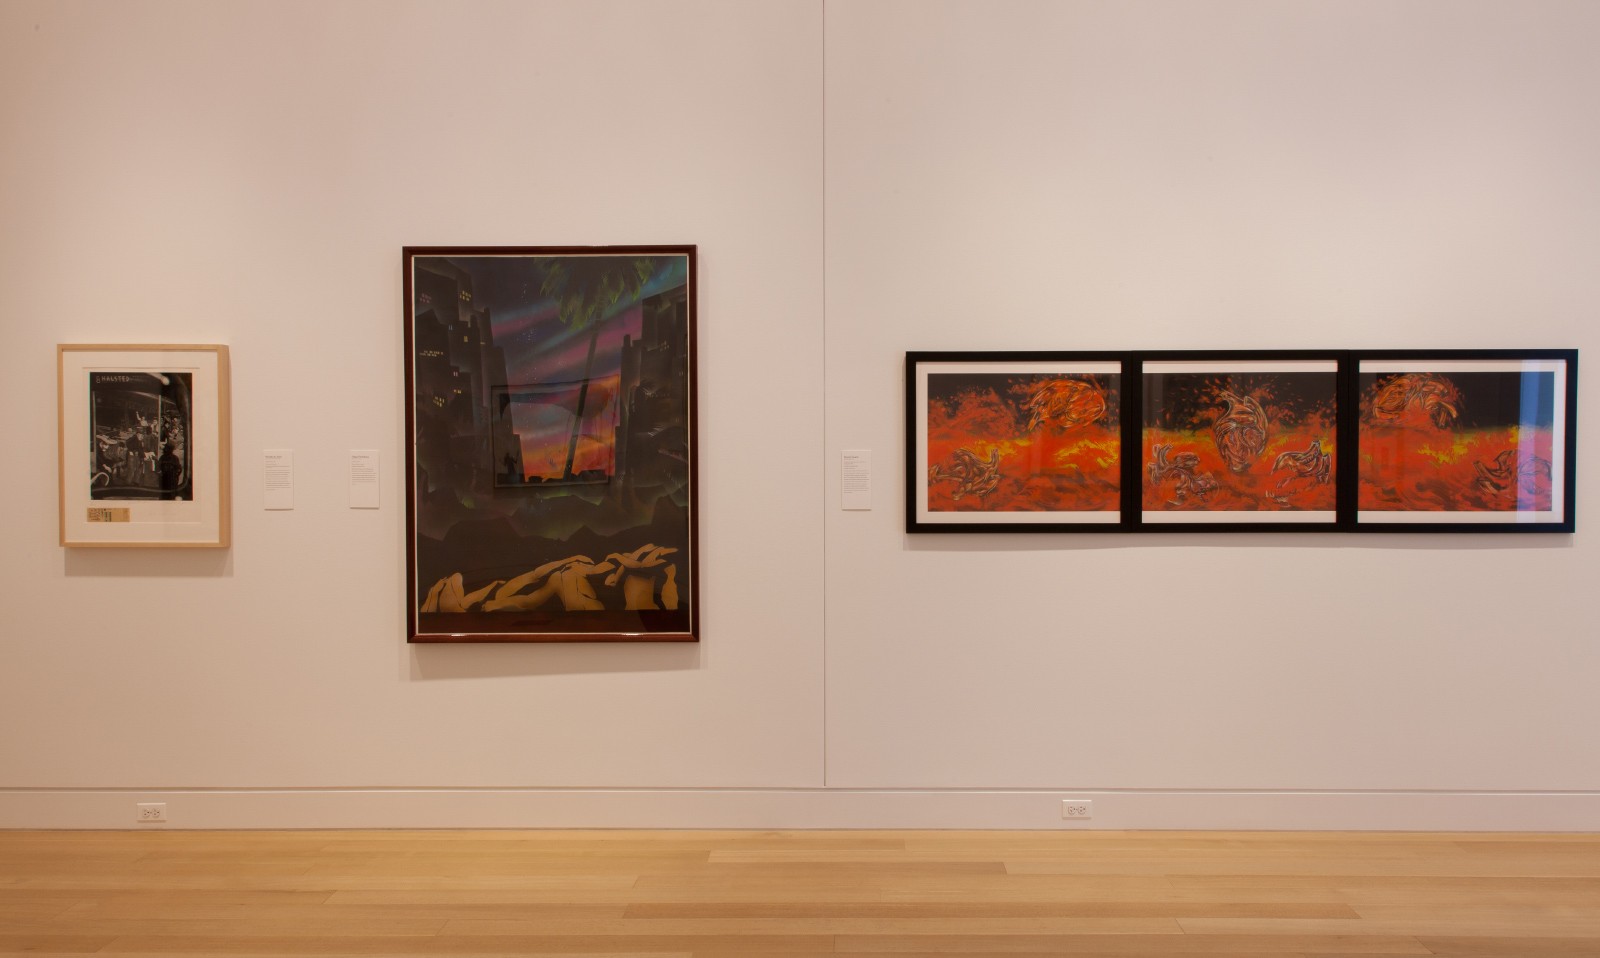 Installation view of "Nexo/Nexus: Latin American Connections in the Midwest"